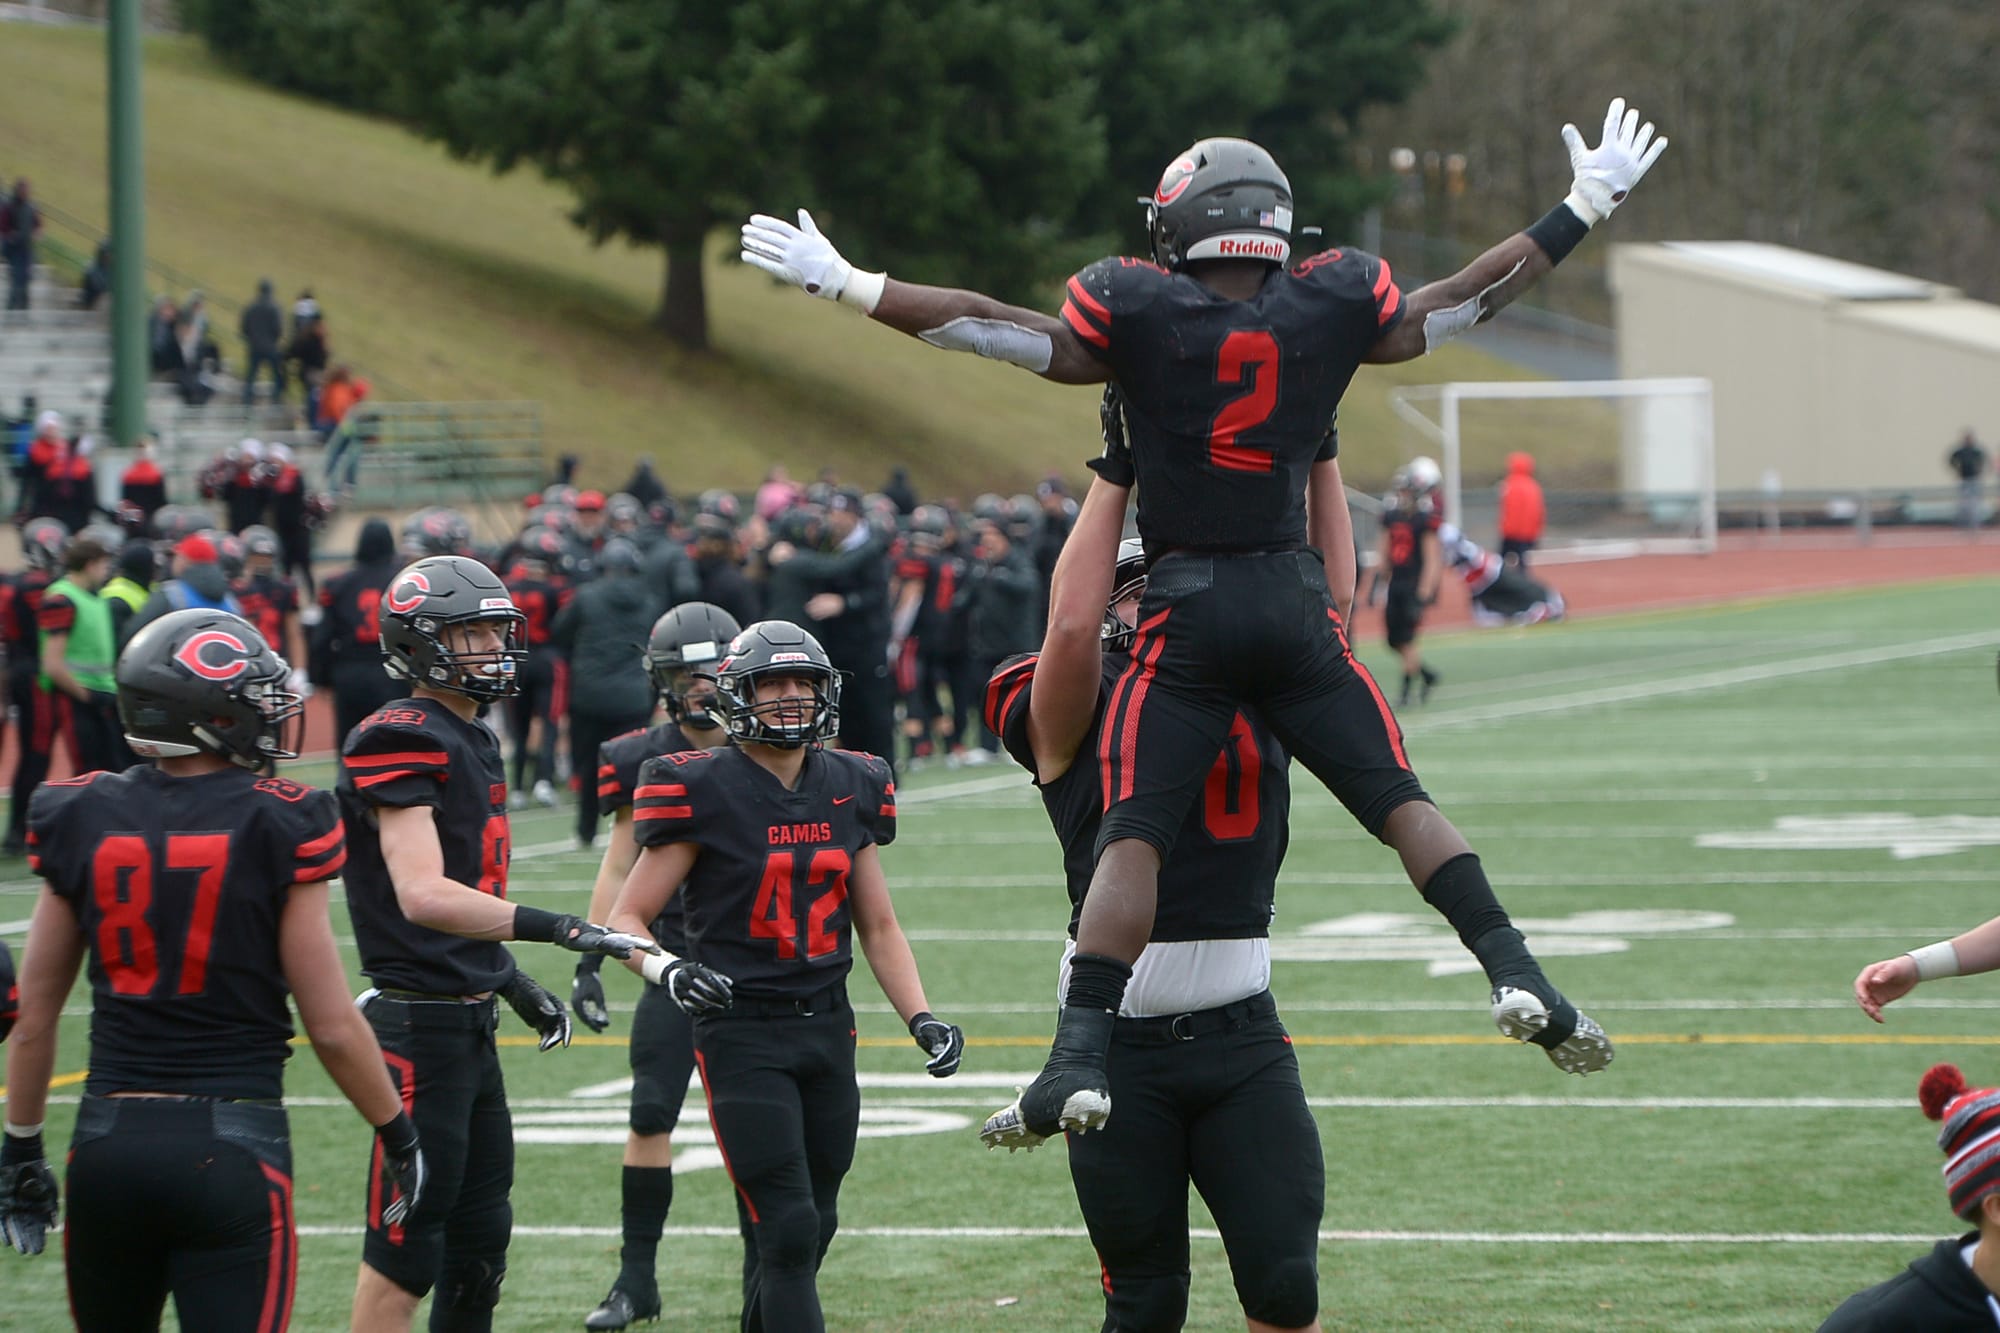 Camas running back Jacques Badolato-Birdsell is hoisted by teammate Rush Reimer after scoring a touchdown against Mount Si at McKenzie Stadium on Saturday afternoon, November 30, 2019. Camas beat Mount Si 35-14 to move on to the 4A state title game.